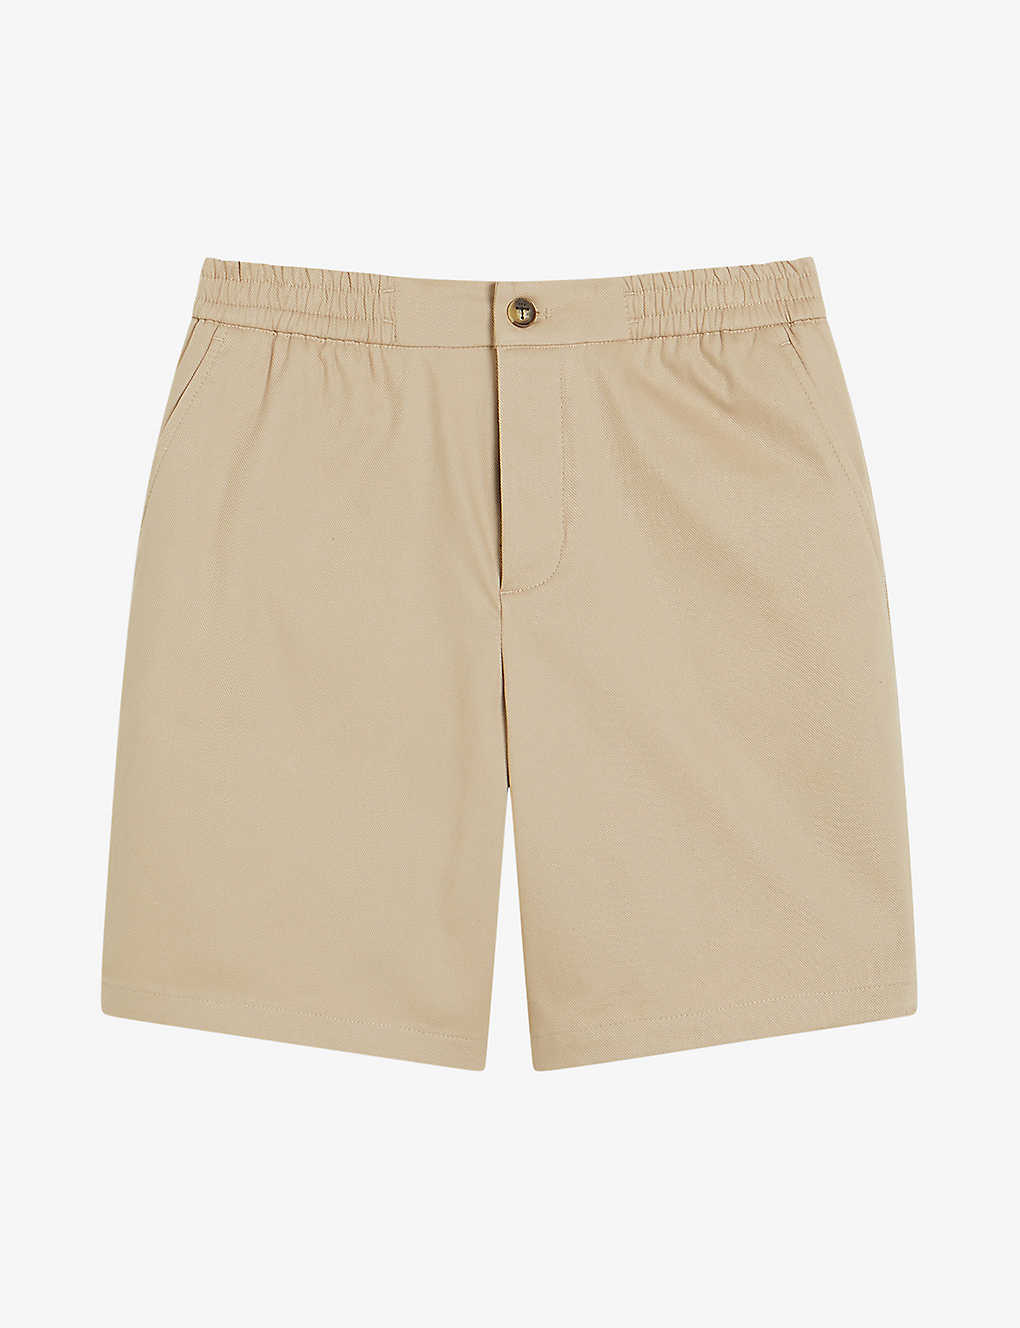 Ted Baker Mens Natural Elasticated-waist Cotton-twill Shorts